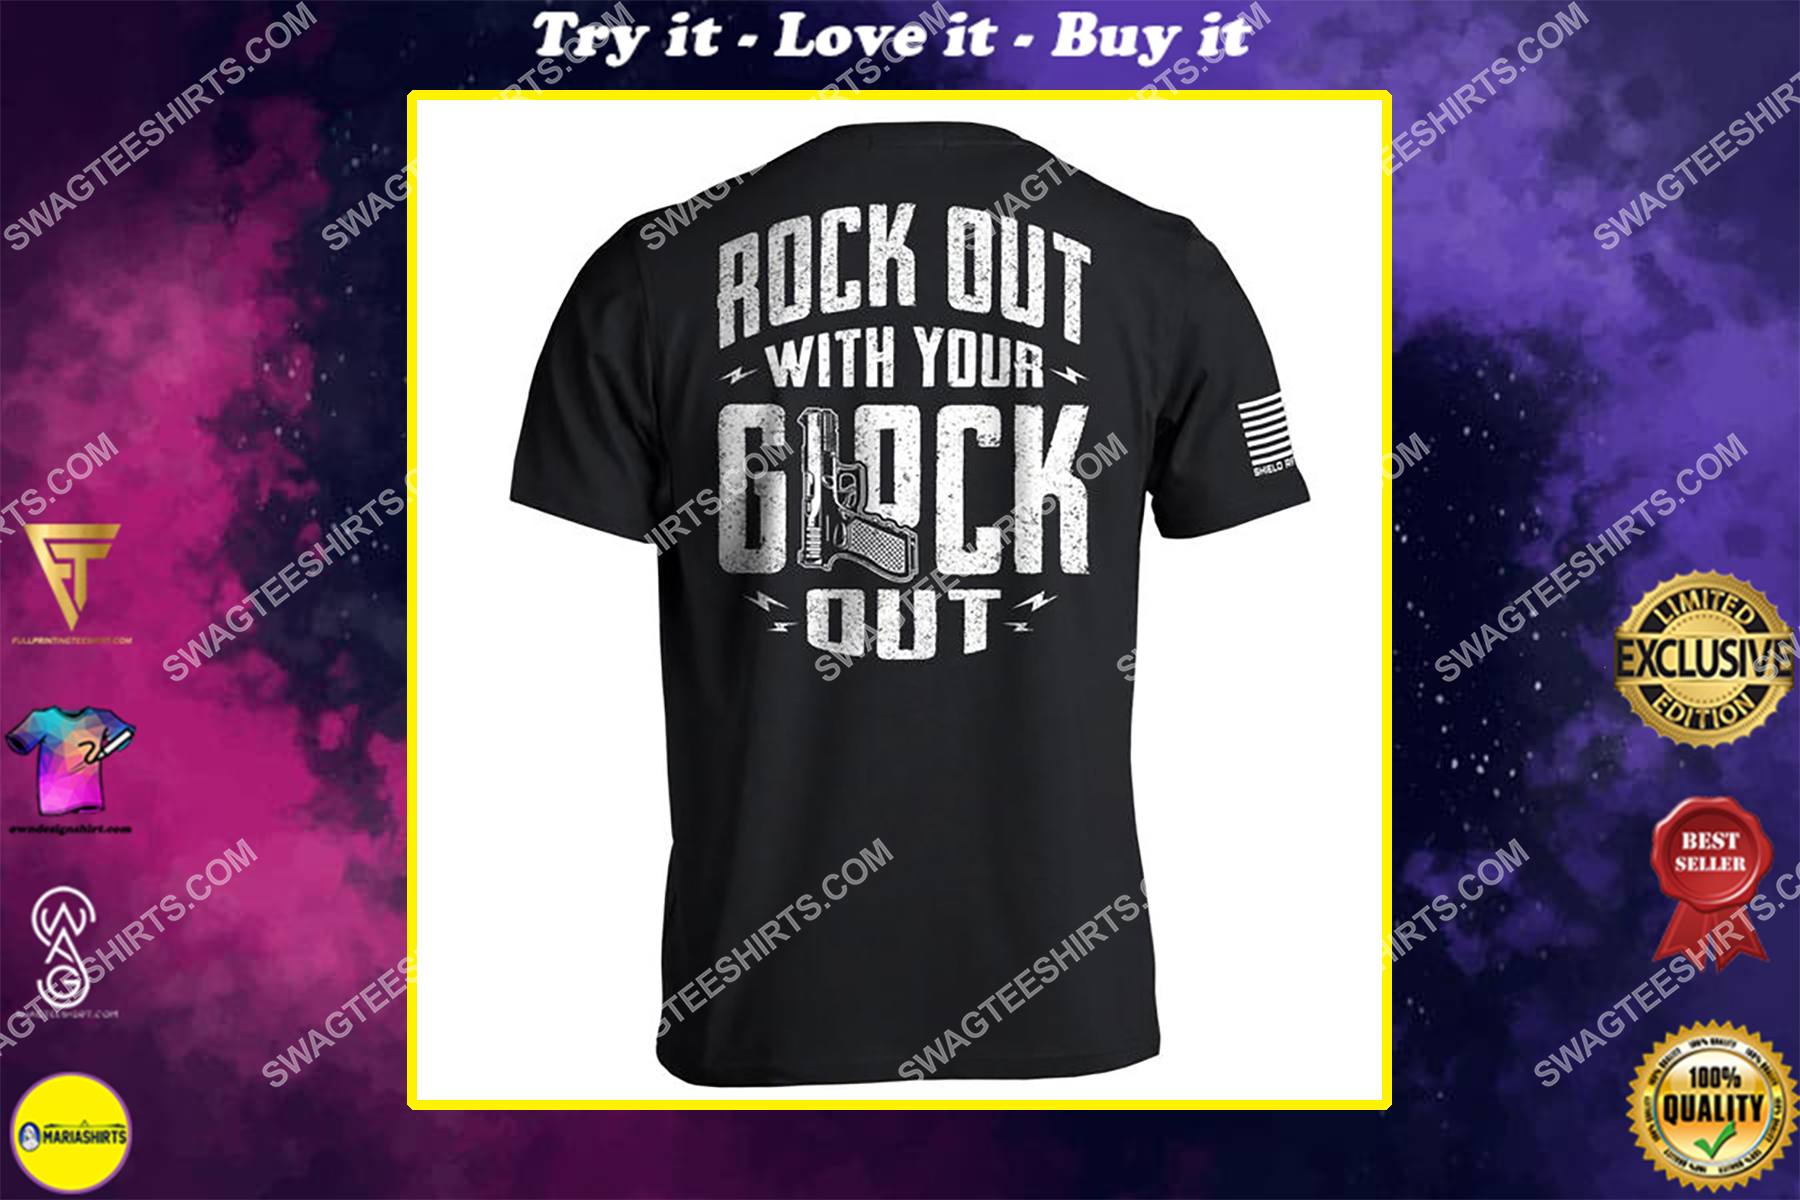 rock out with your glock out shirt